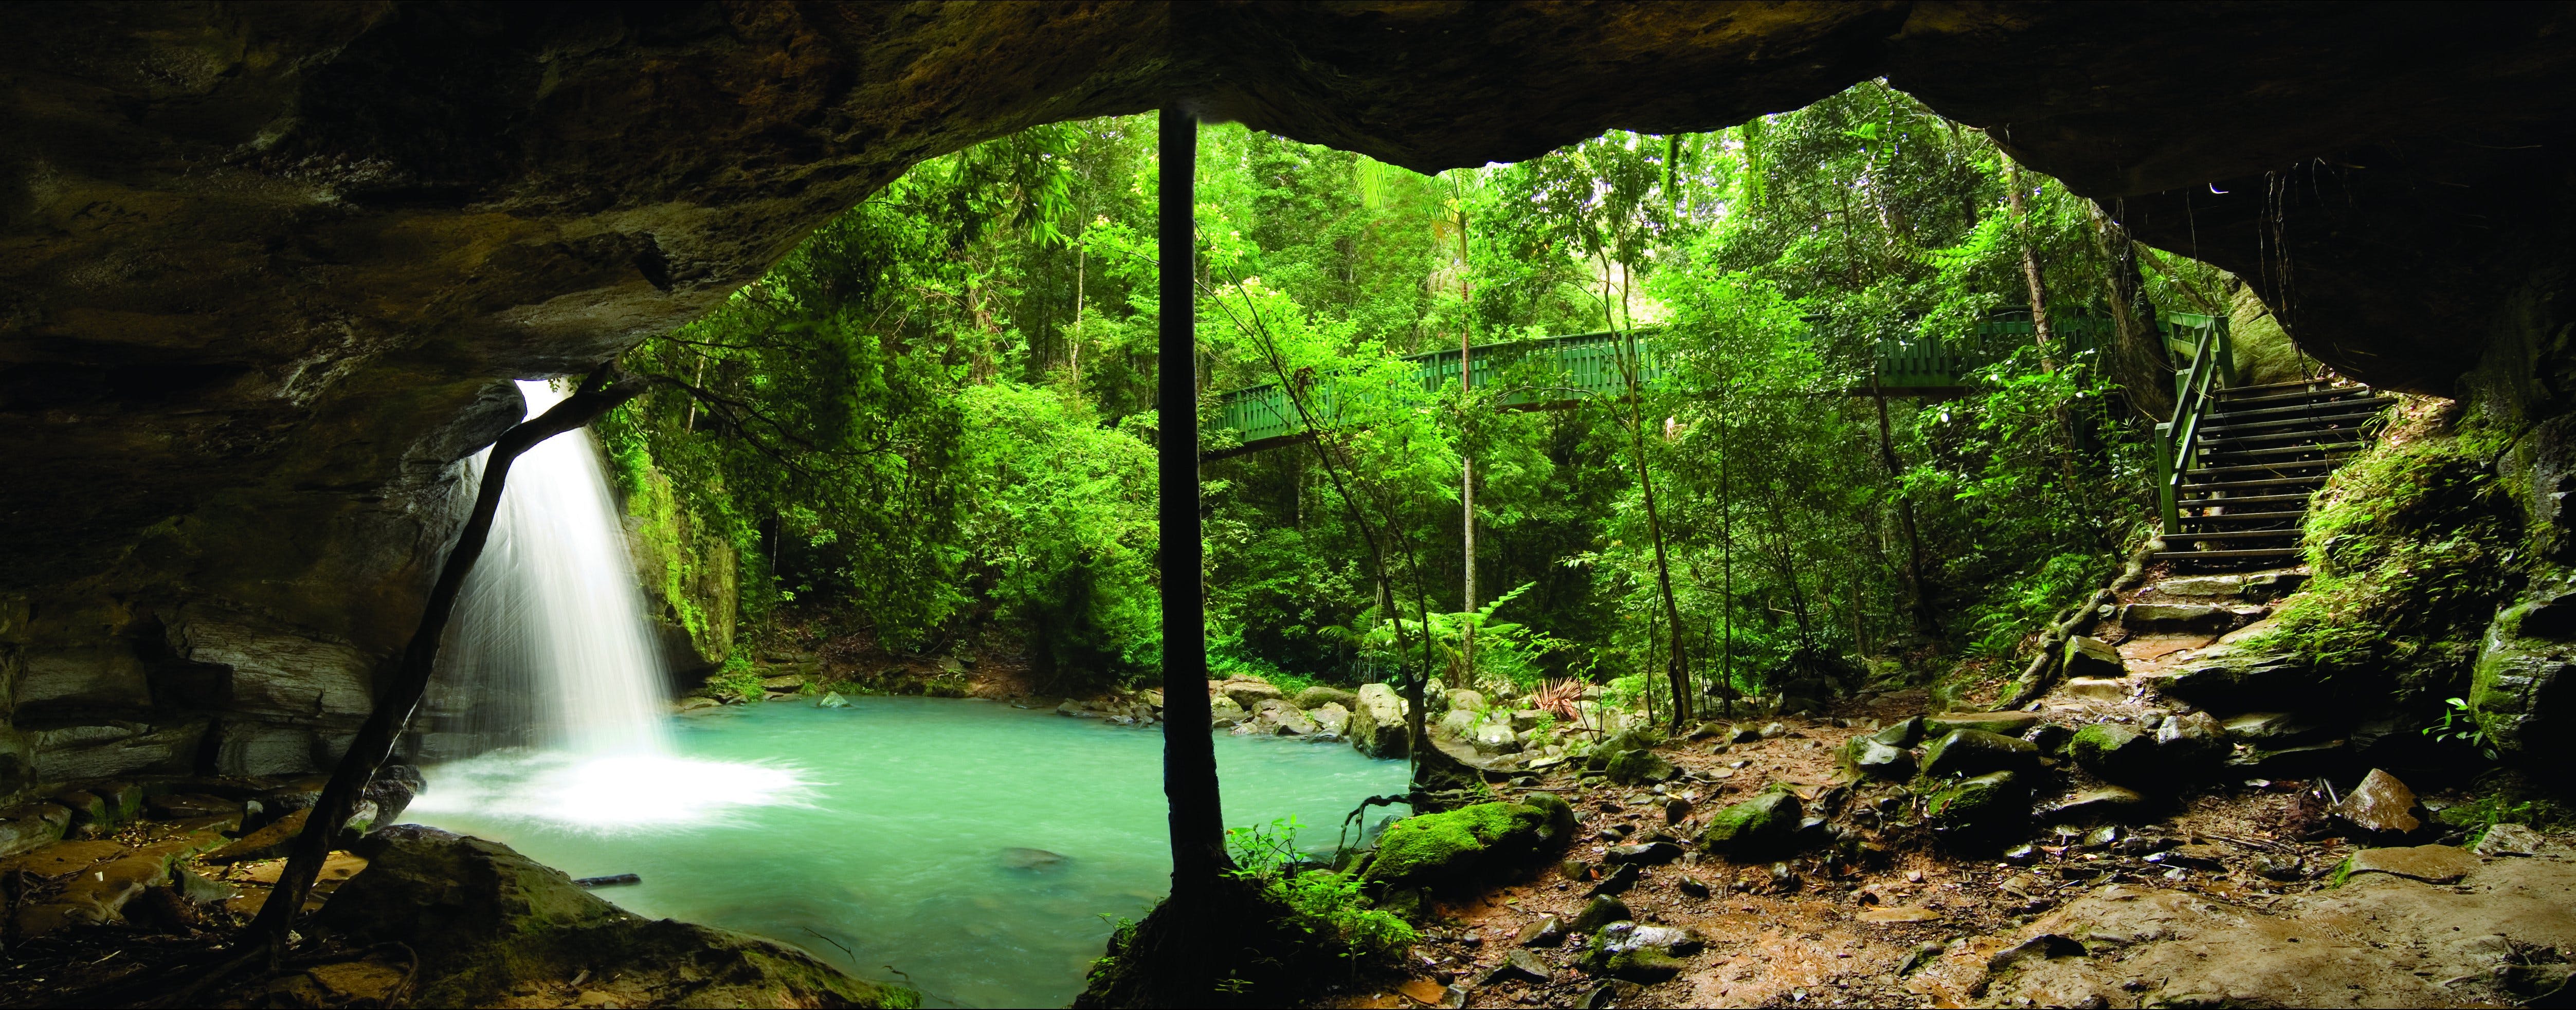 Buderim - Attractions Melbourne